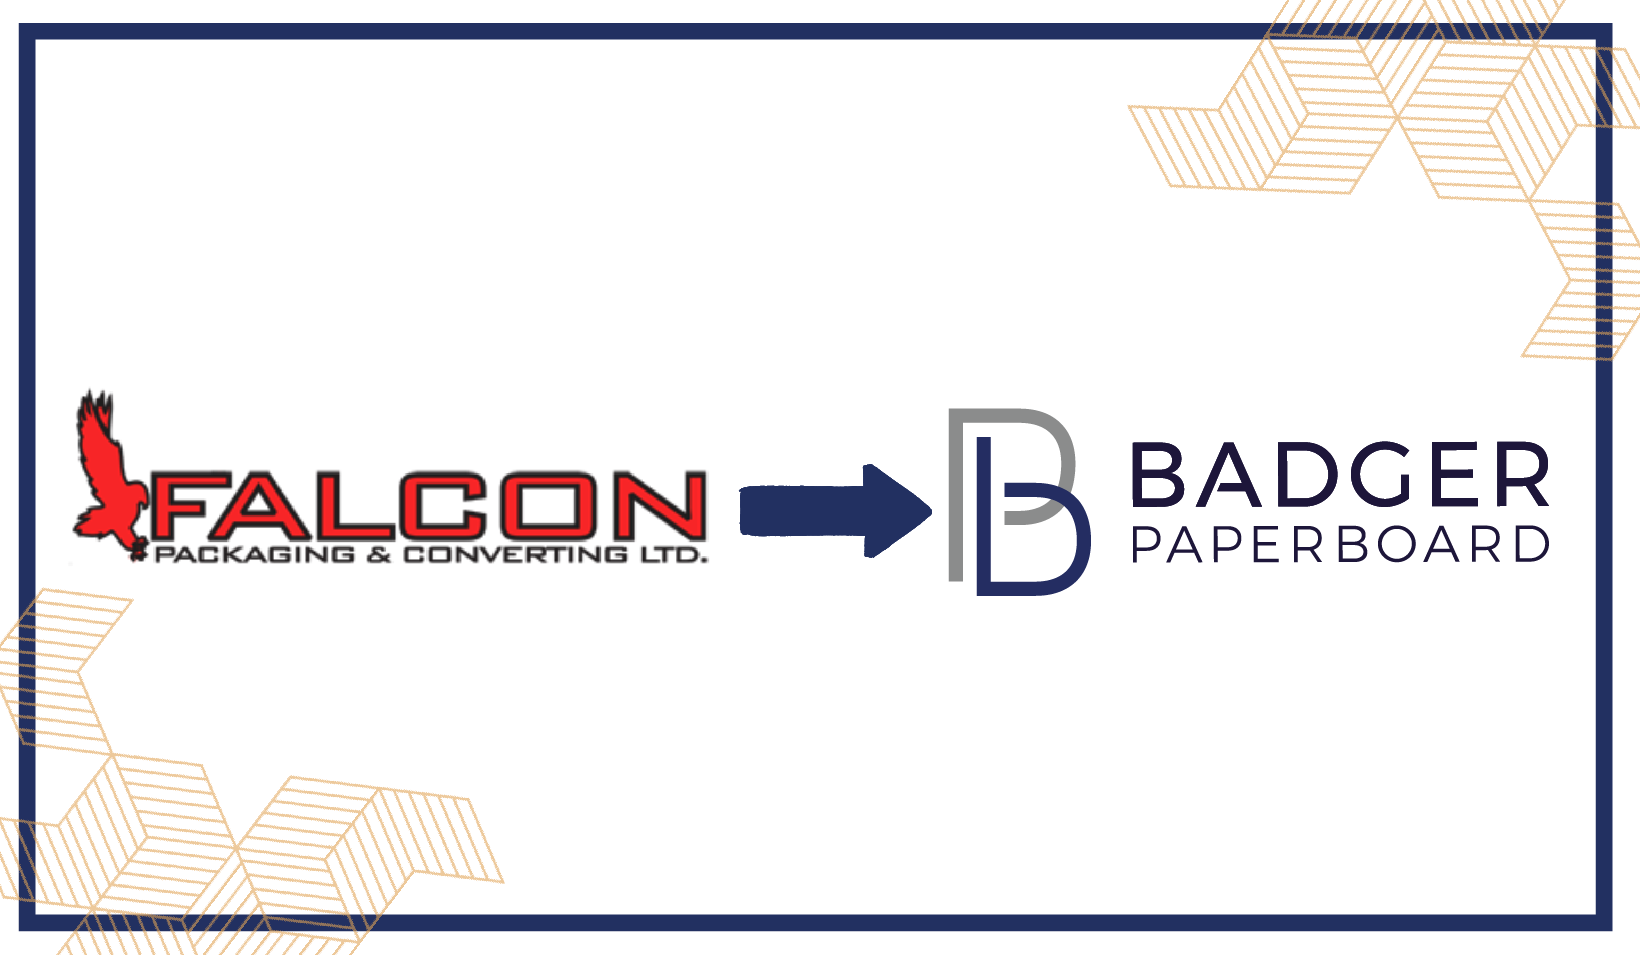 Falcon Packaging logo pointing at the Badger Paperboard logo.